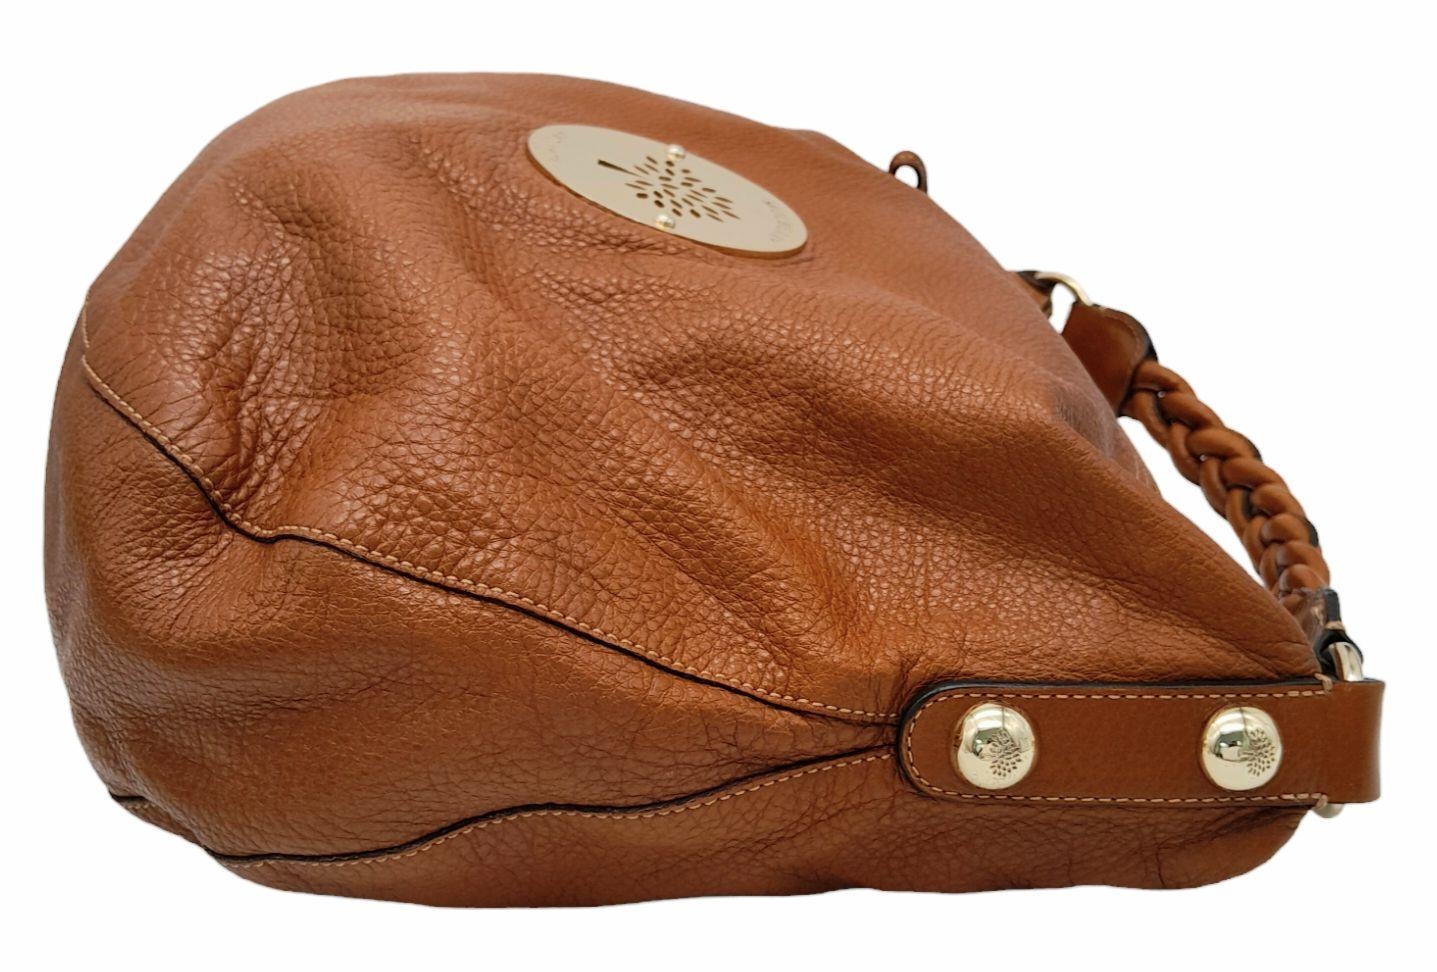 A Mulberry Tan Daria Hobo Bag. Leather exterior with gold-toned hardware, braided strap and zip - Image 4 of 8